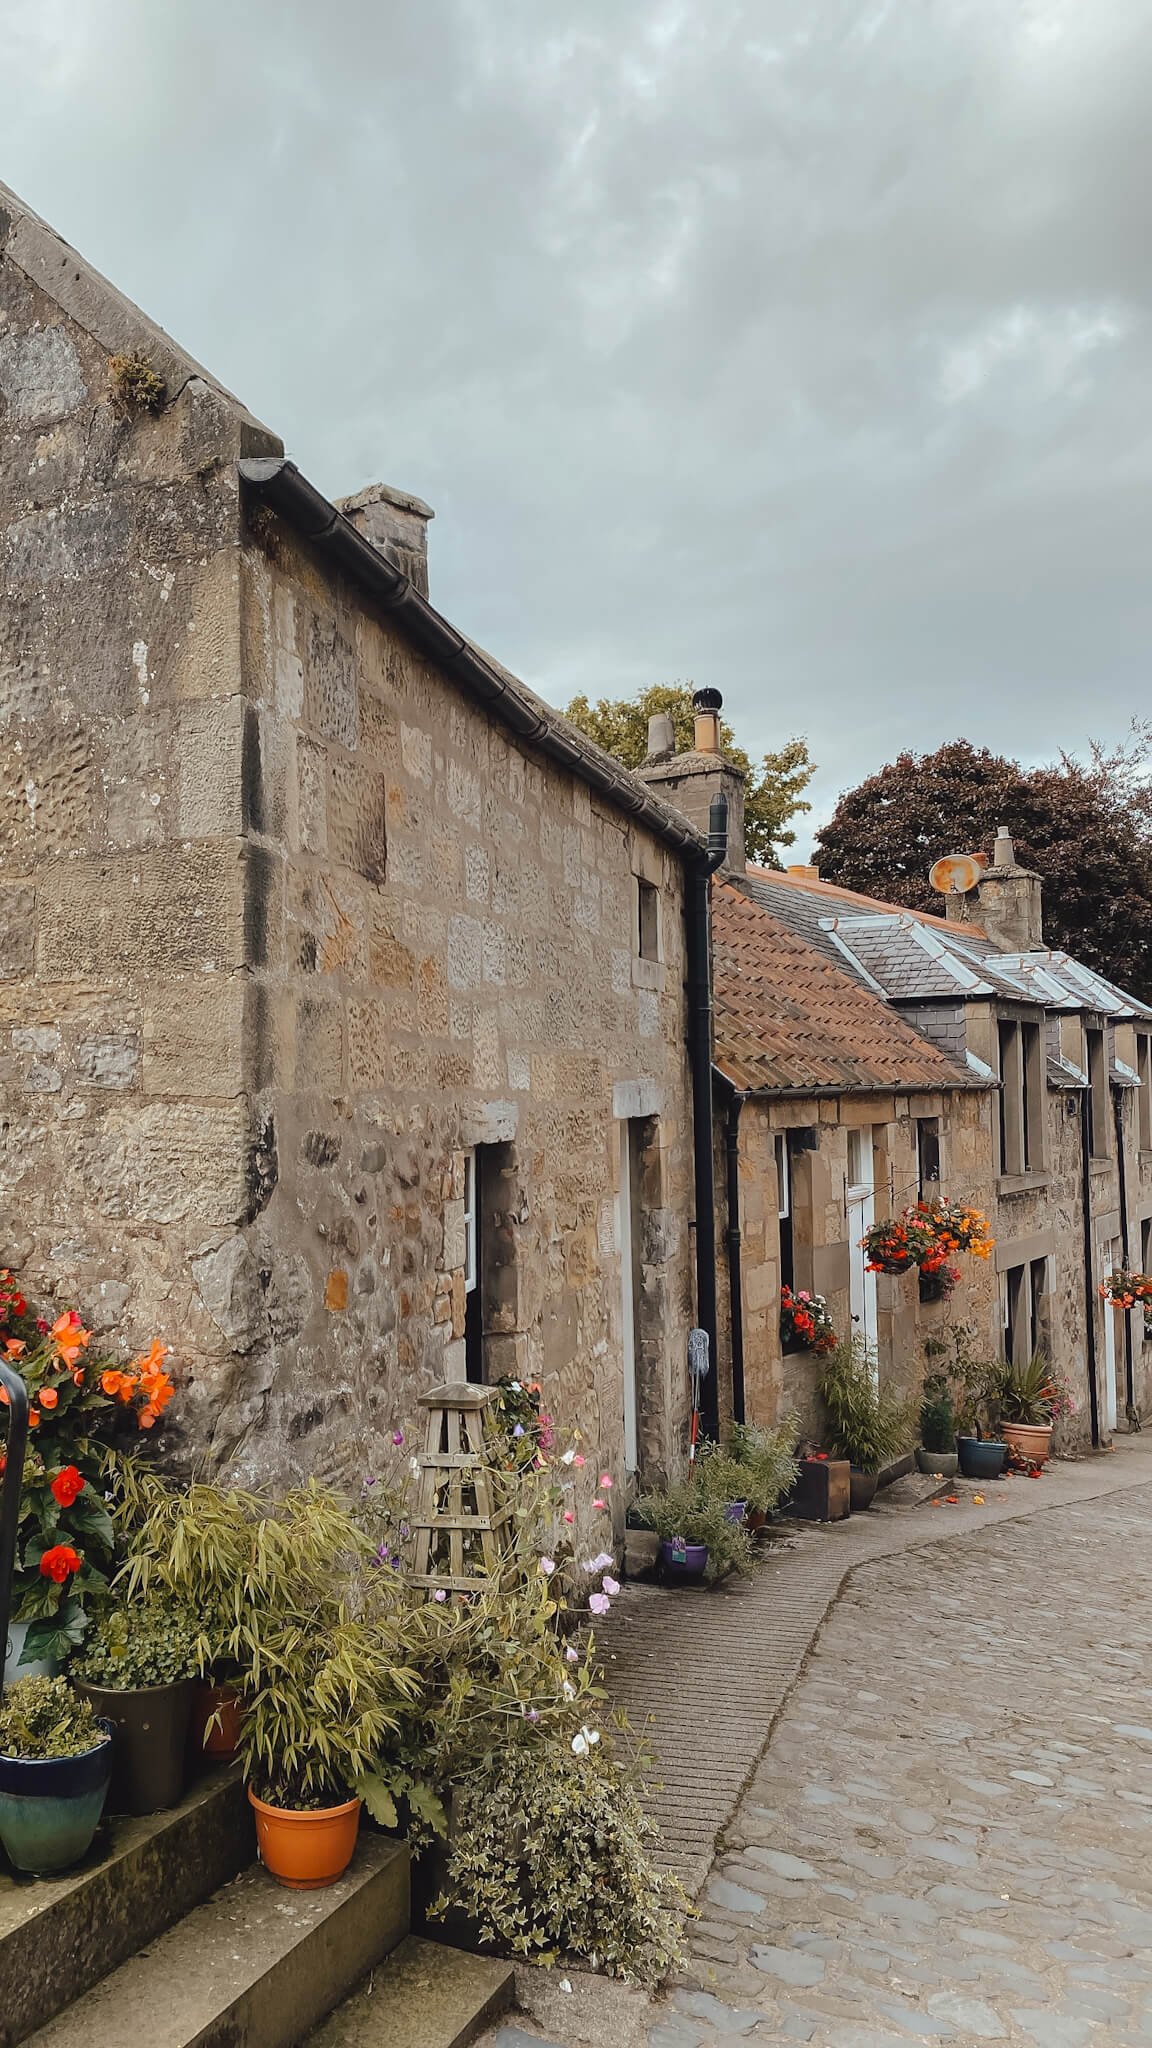 Our day trip to pretty Falkland